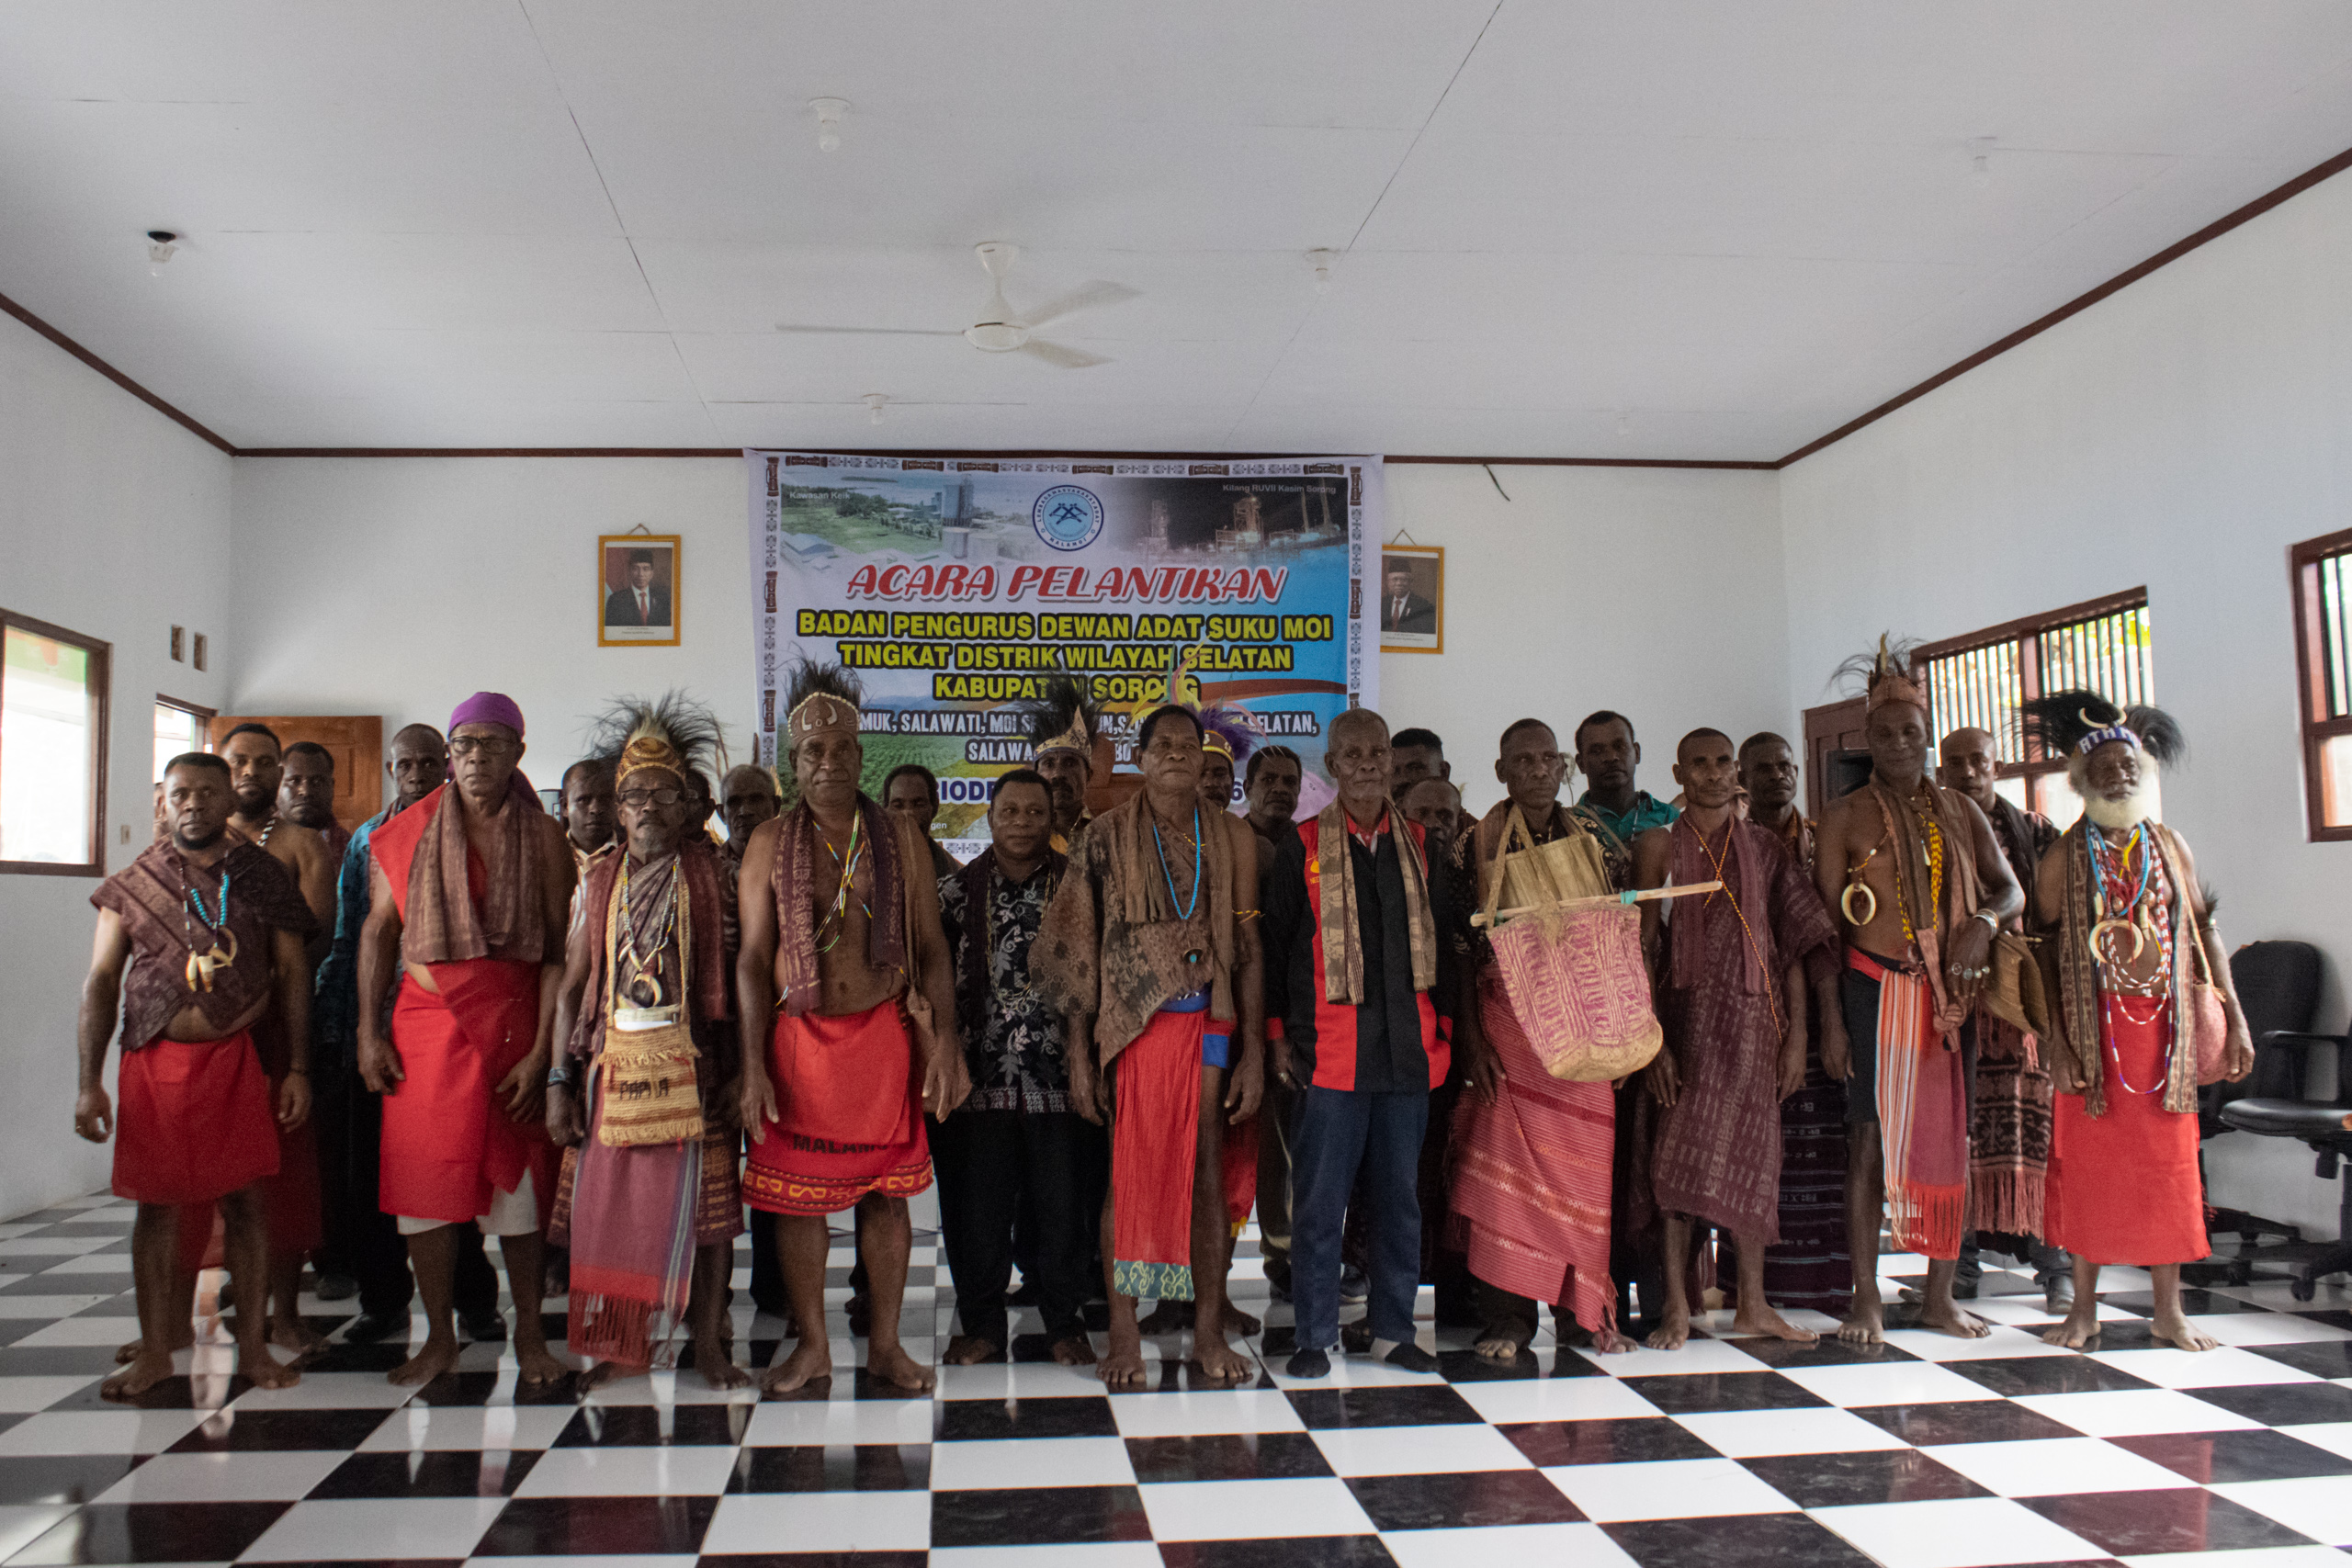 A ceremony in Sorong city to inaugurate the heads of Moi indigenous councils